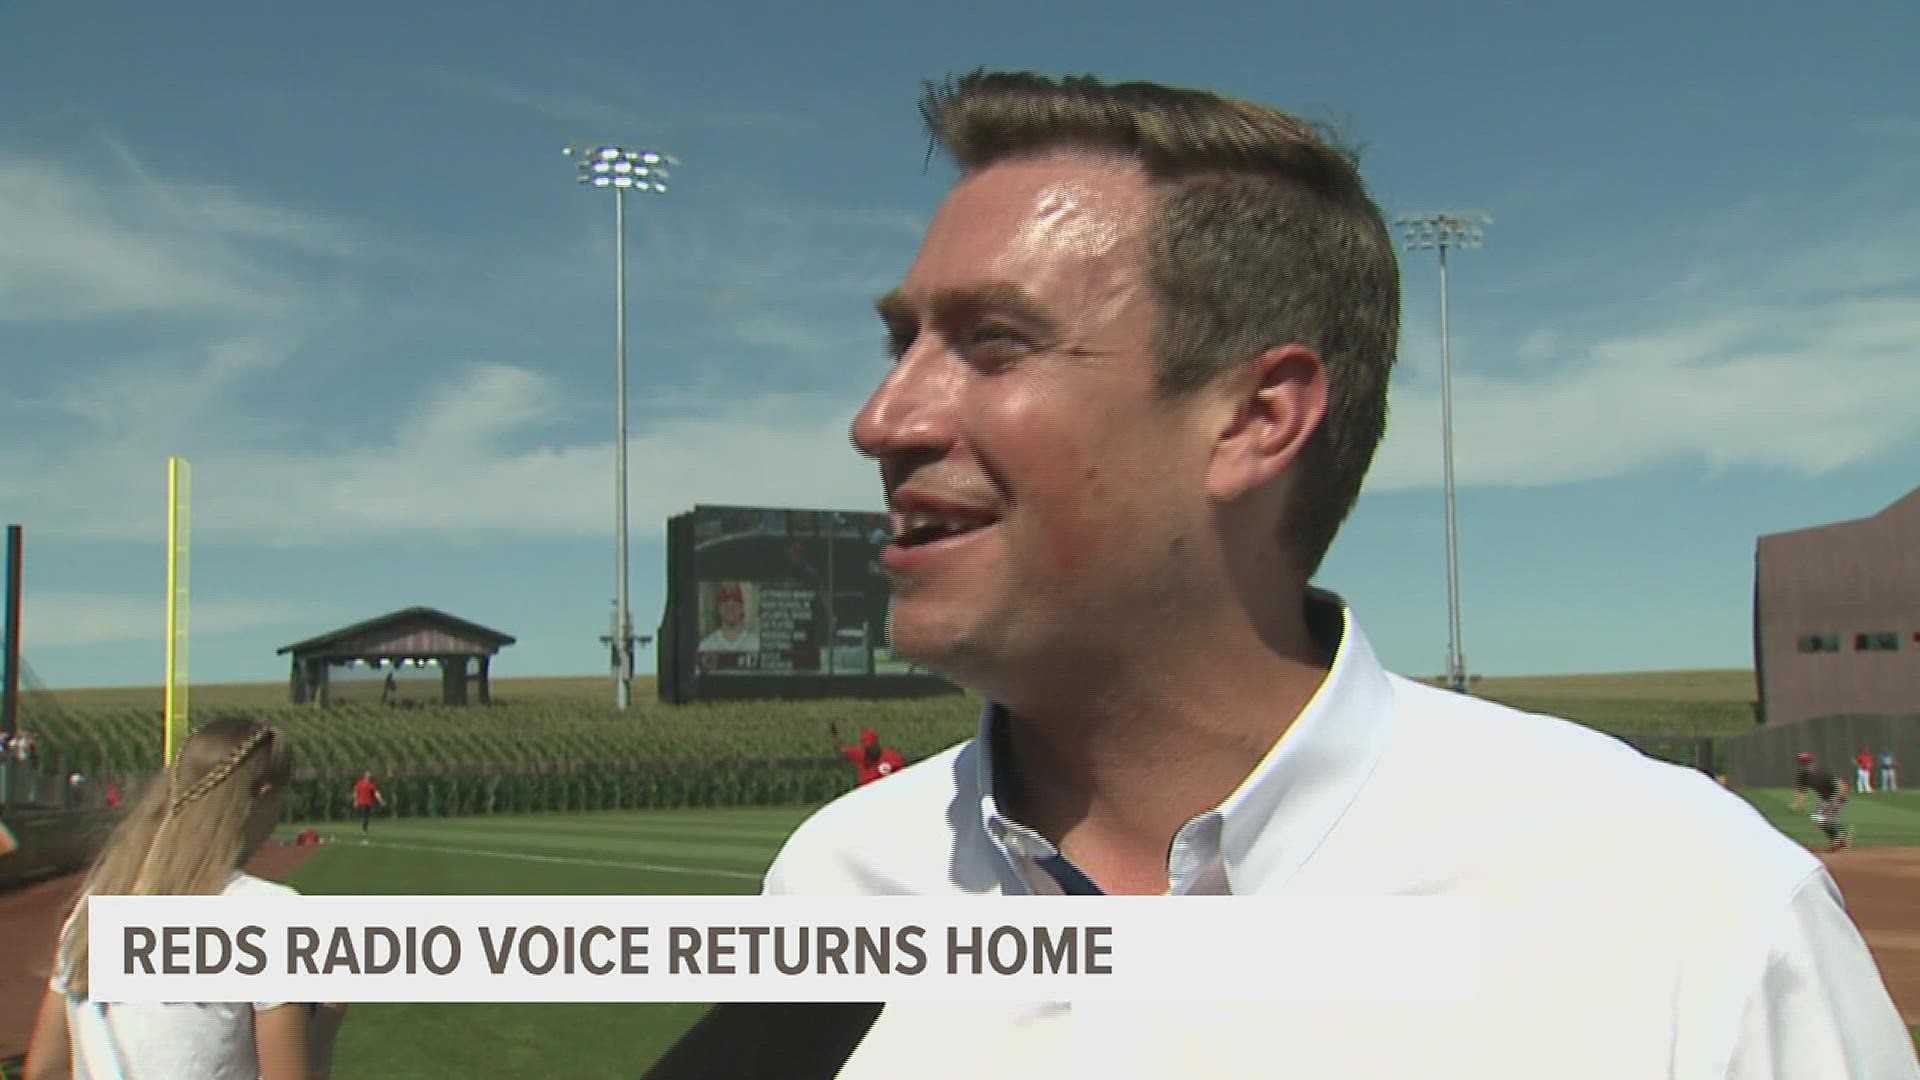 News 8 Sports got to reunite with the familiar face of former Bandits voice and current Reds radio caster Tommy Thrall, who came back home to broadcast the game.